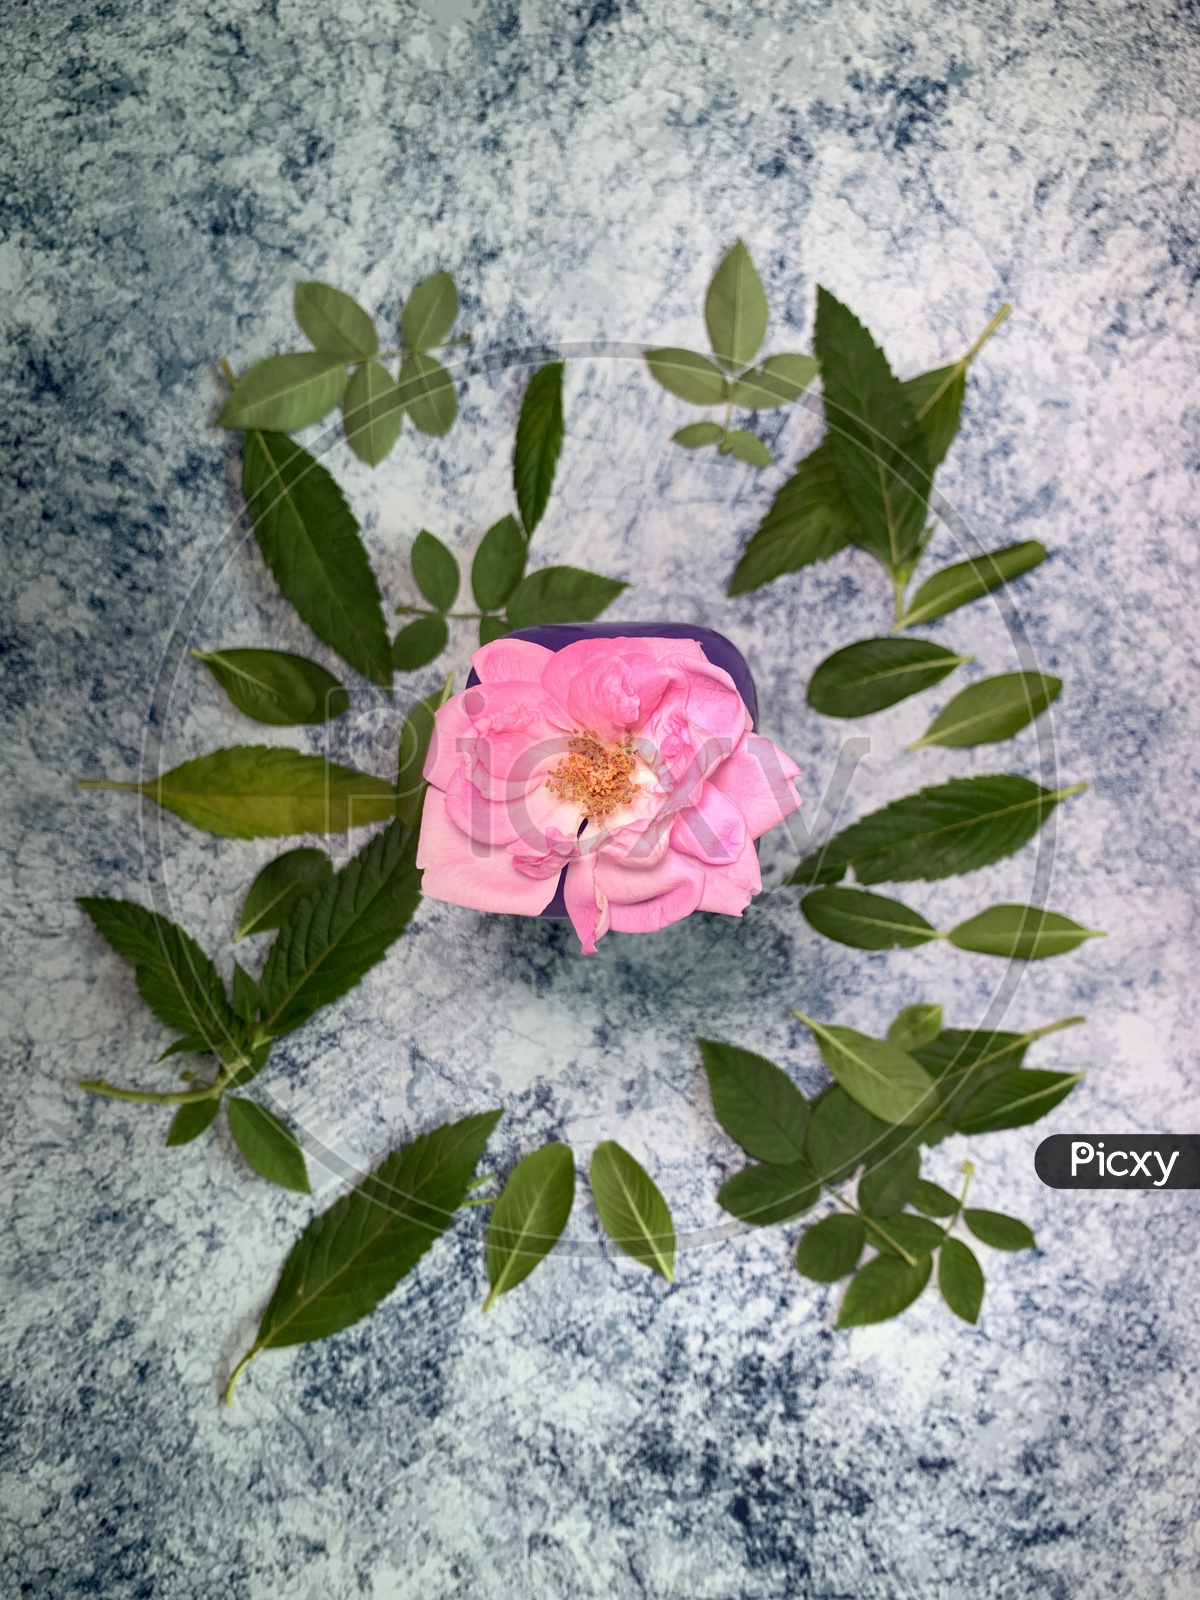 Portrait of a single rose on the flat textured background